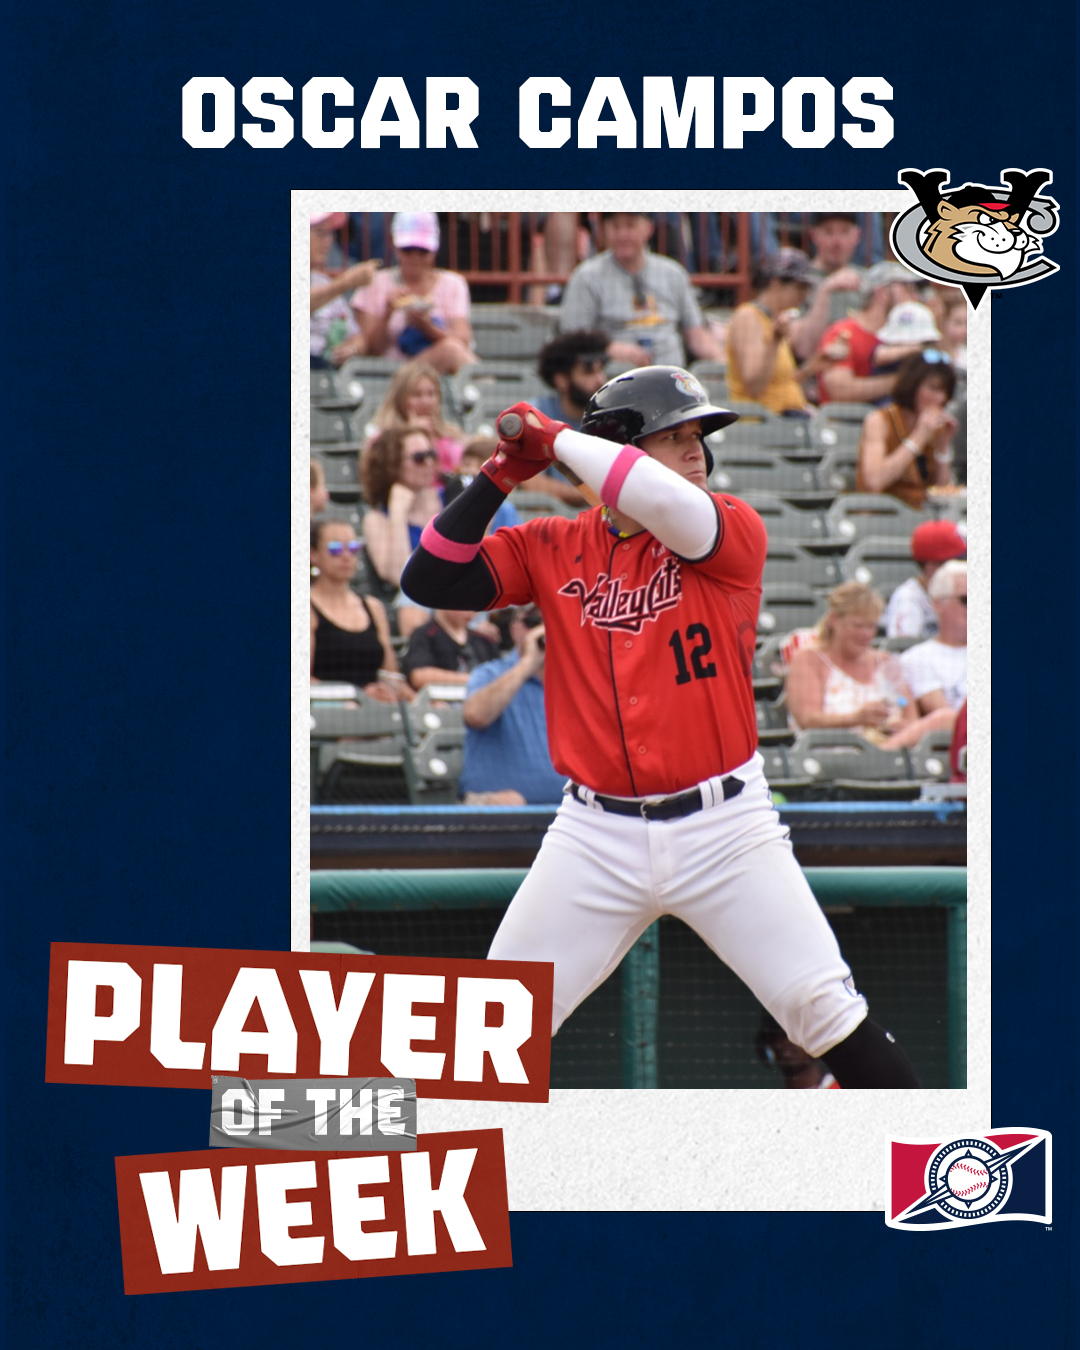 OSCAR CAMPOS WINS PLAYER OF THE WEEK!